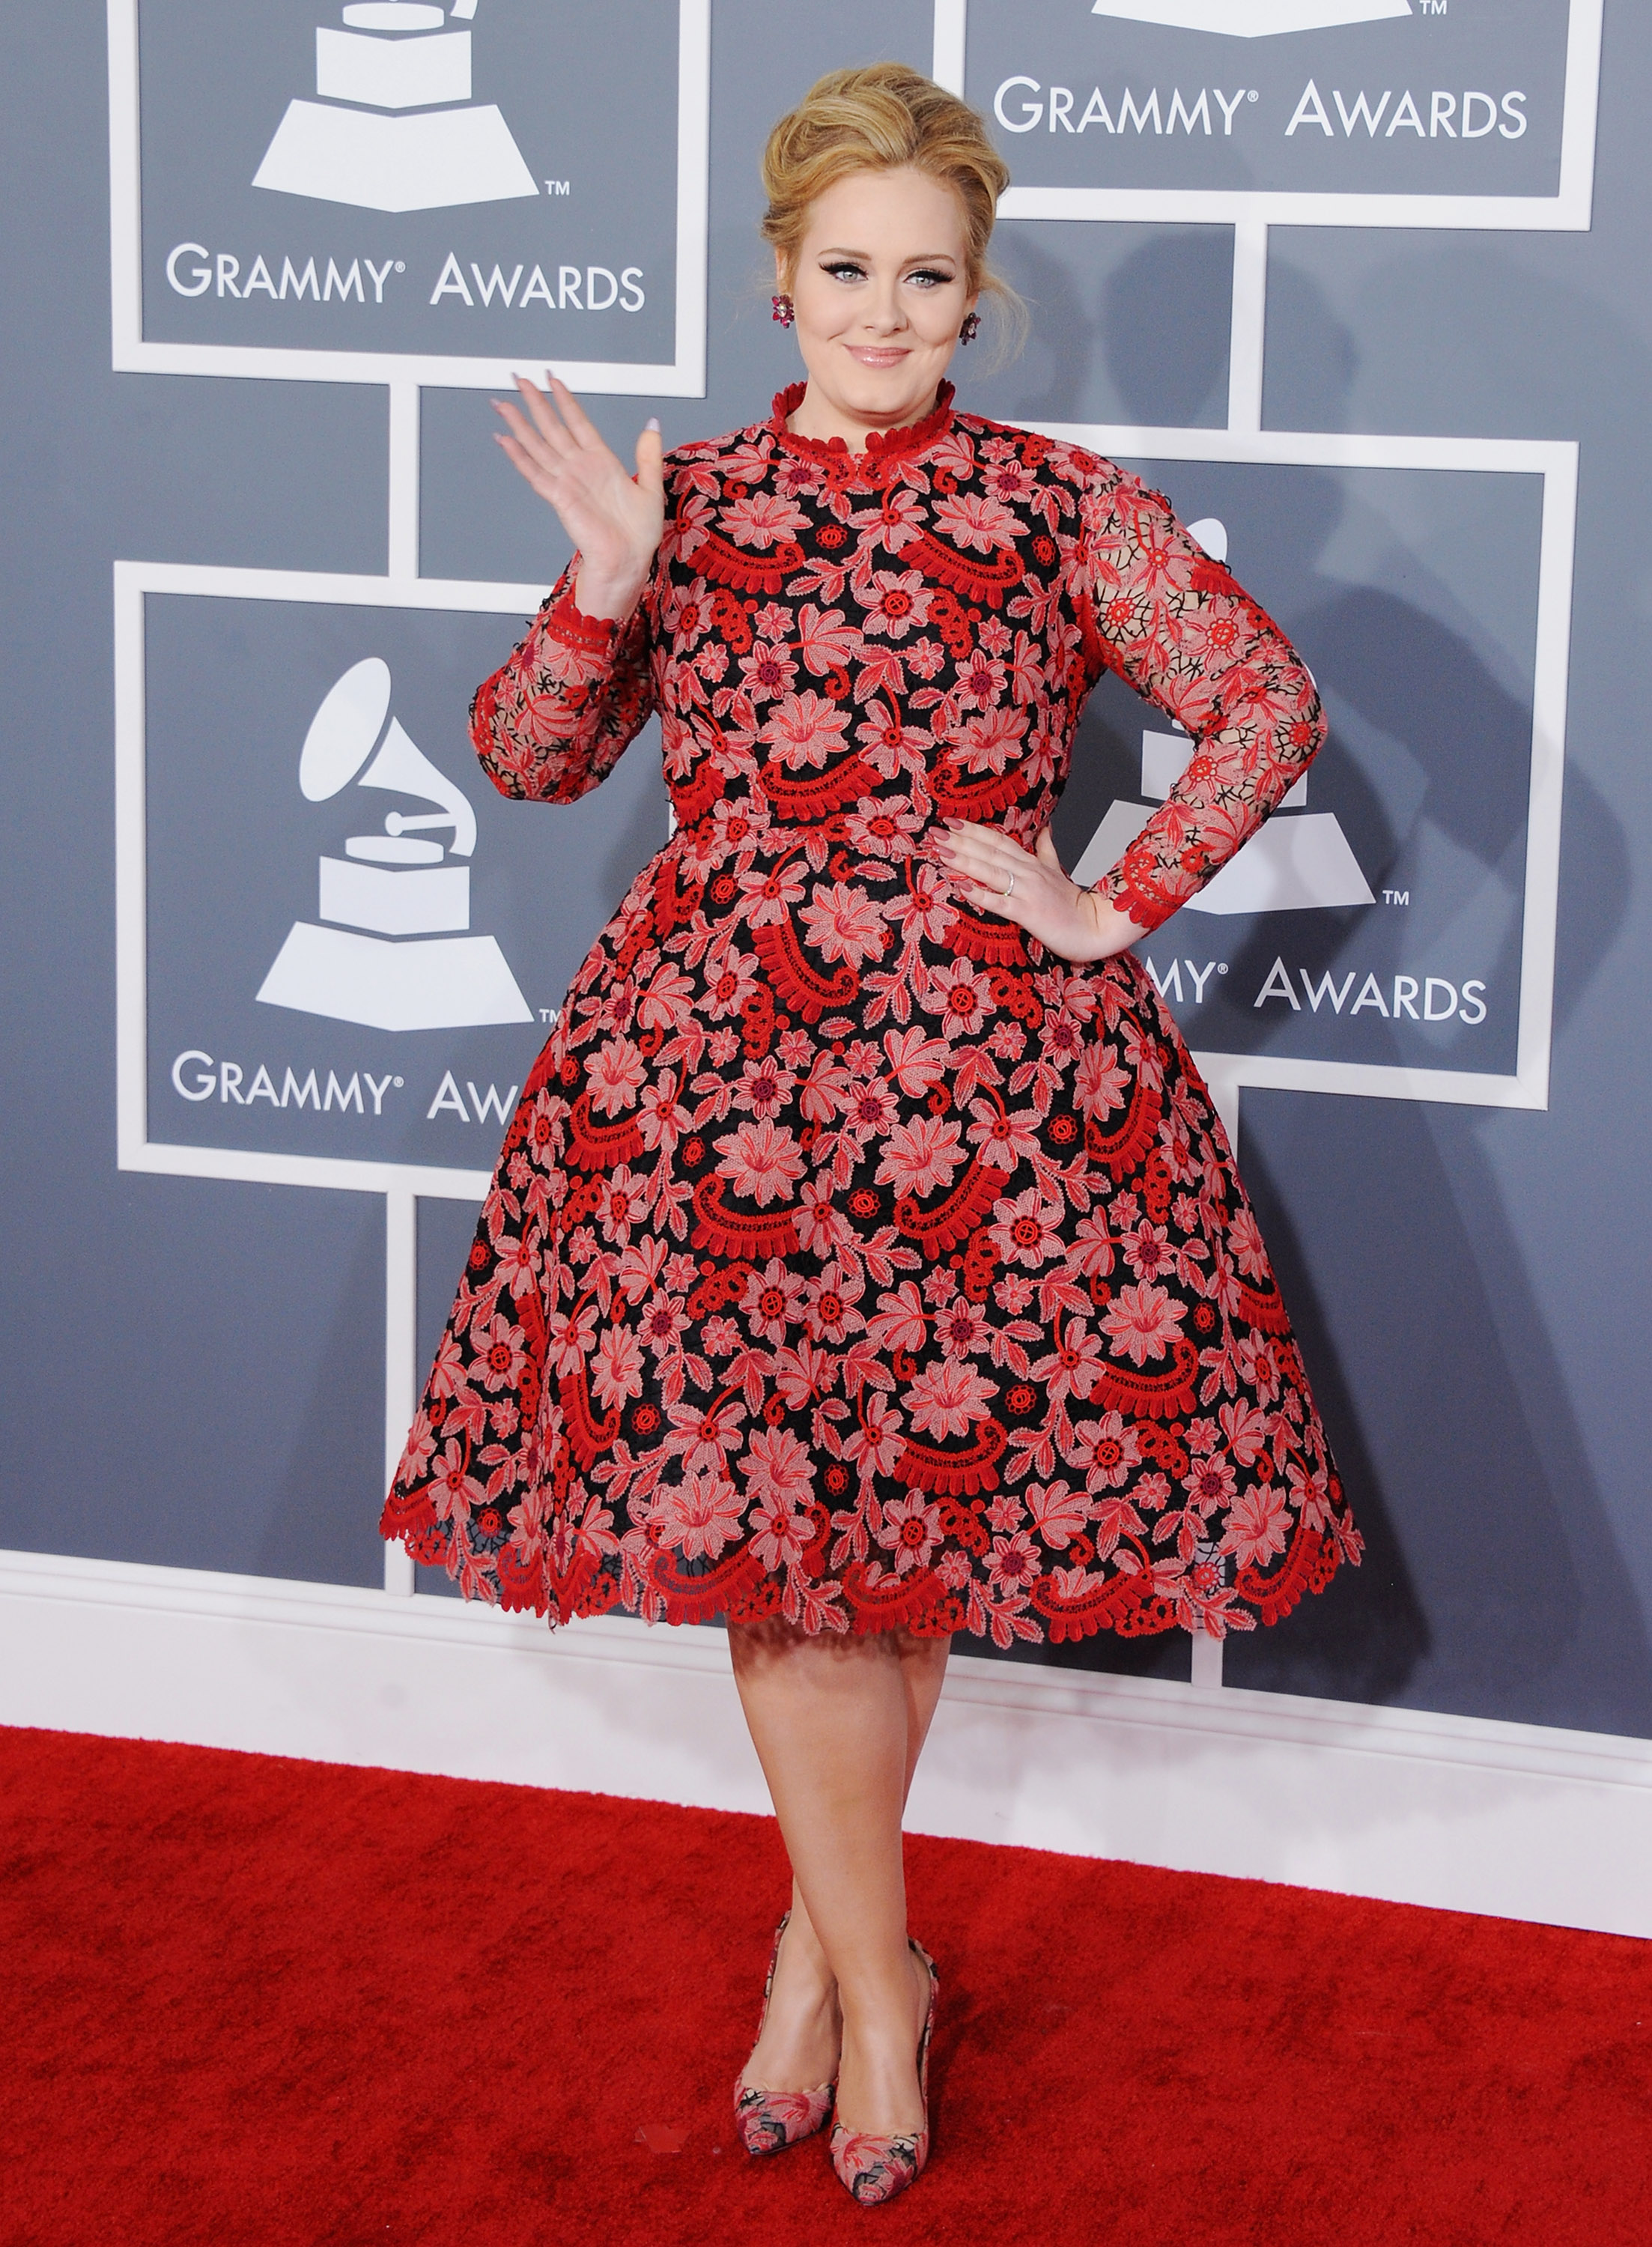 Adele arrives at The 55th Annual GRAMMY Awards at Staples Center in Los Angeles on Feb. 10, 2013.